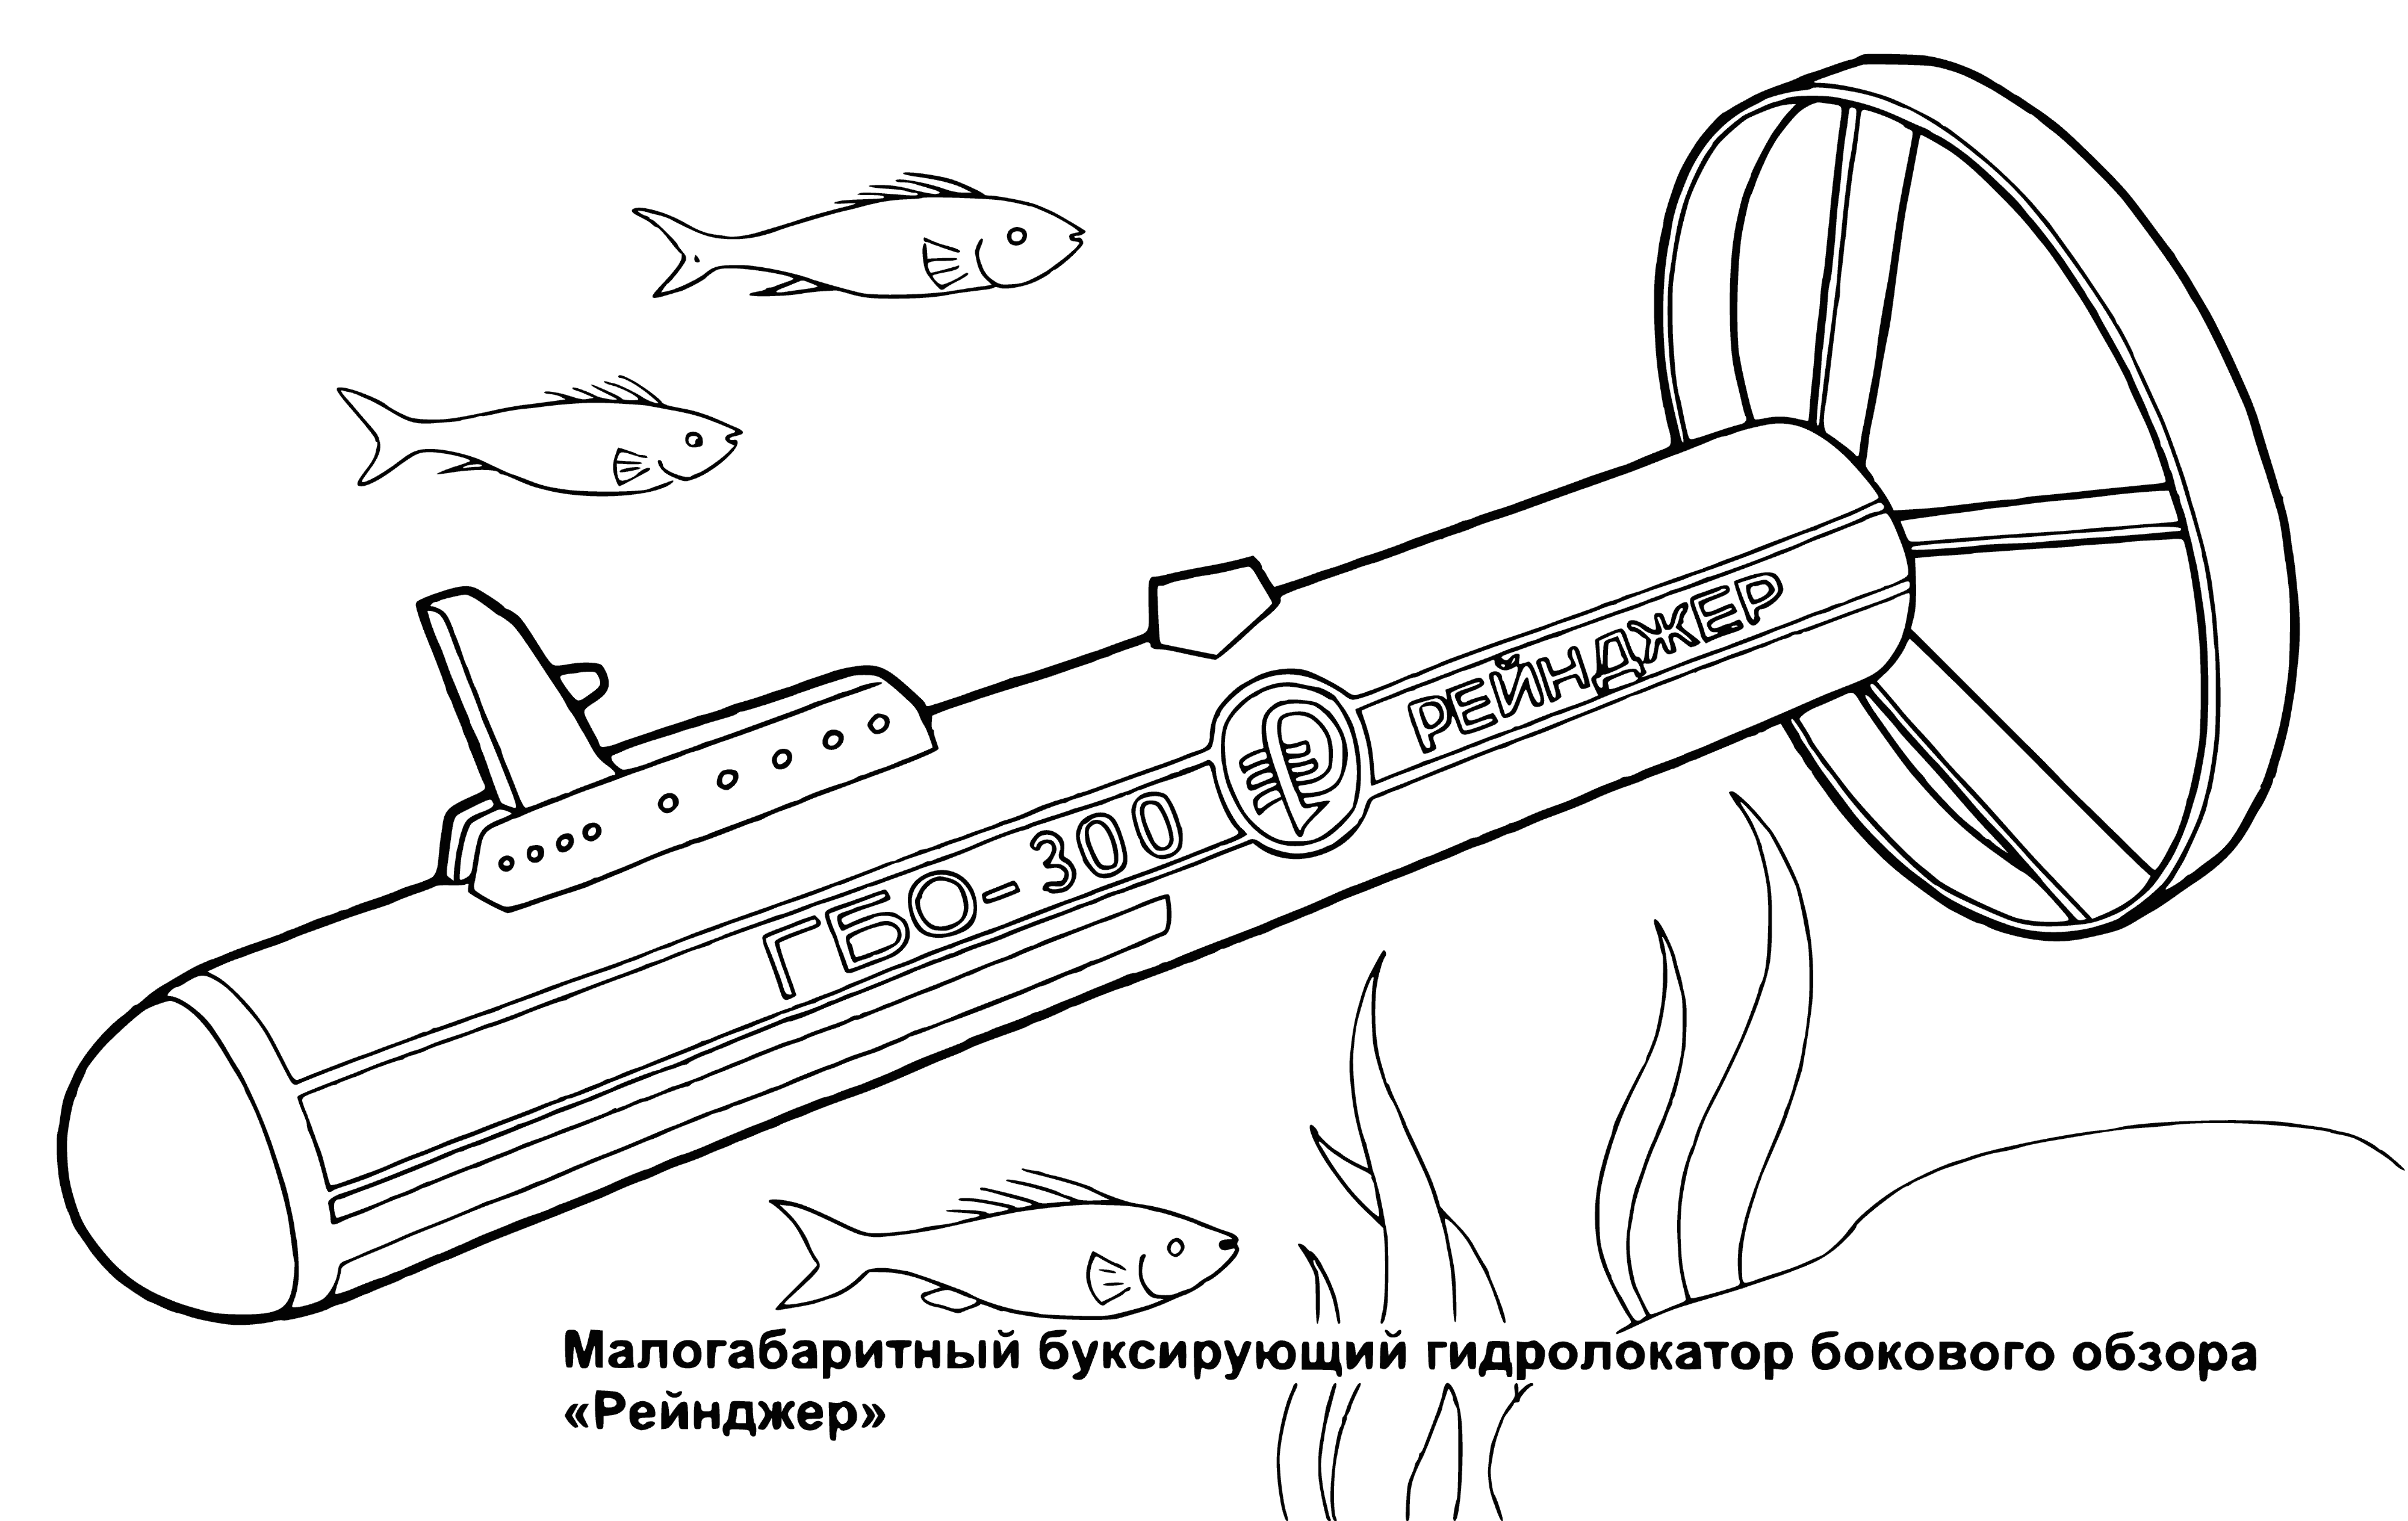 coloring page: Sonar searches underwater with a light and camera to locate objects and take coloring pages. #technology